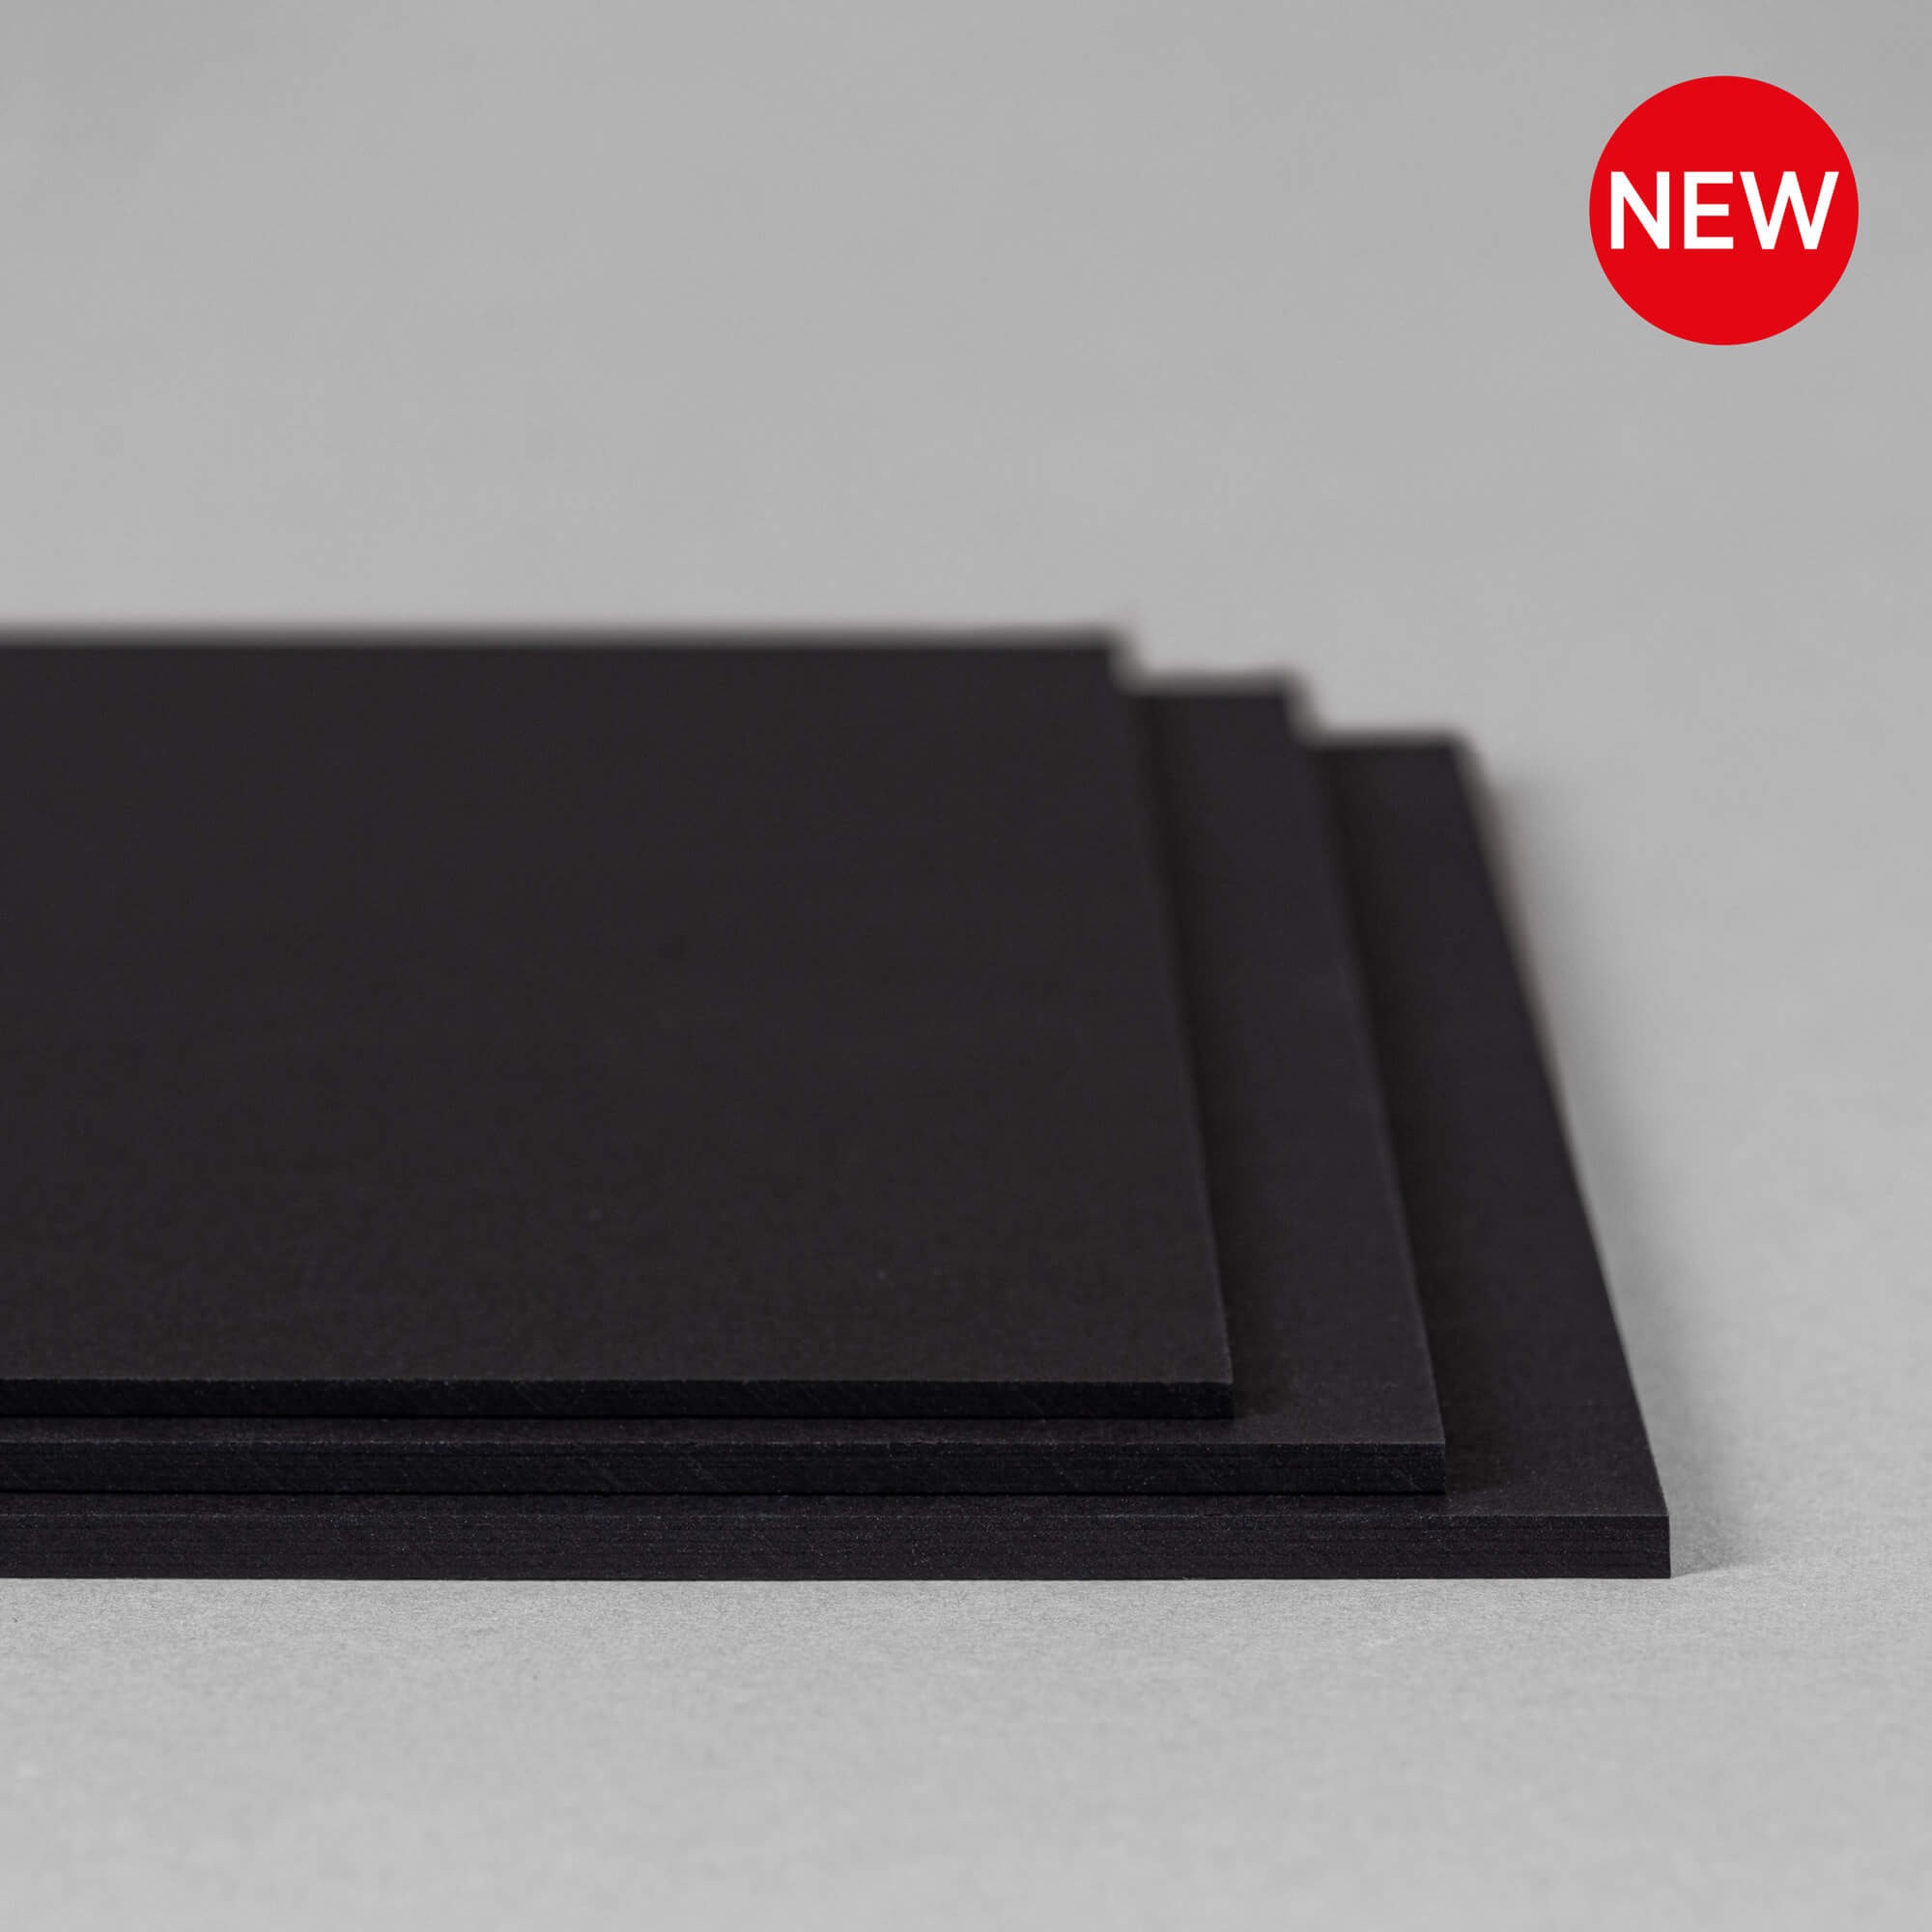 NEW: KROMA All Black cardboard in different thicknesses